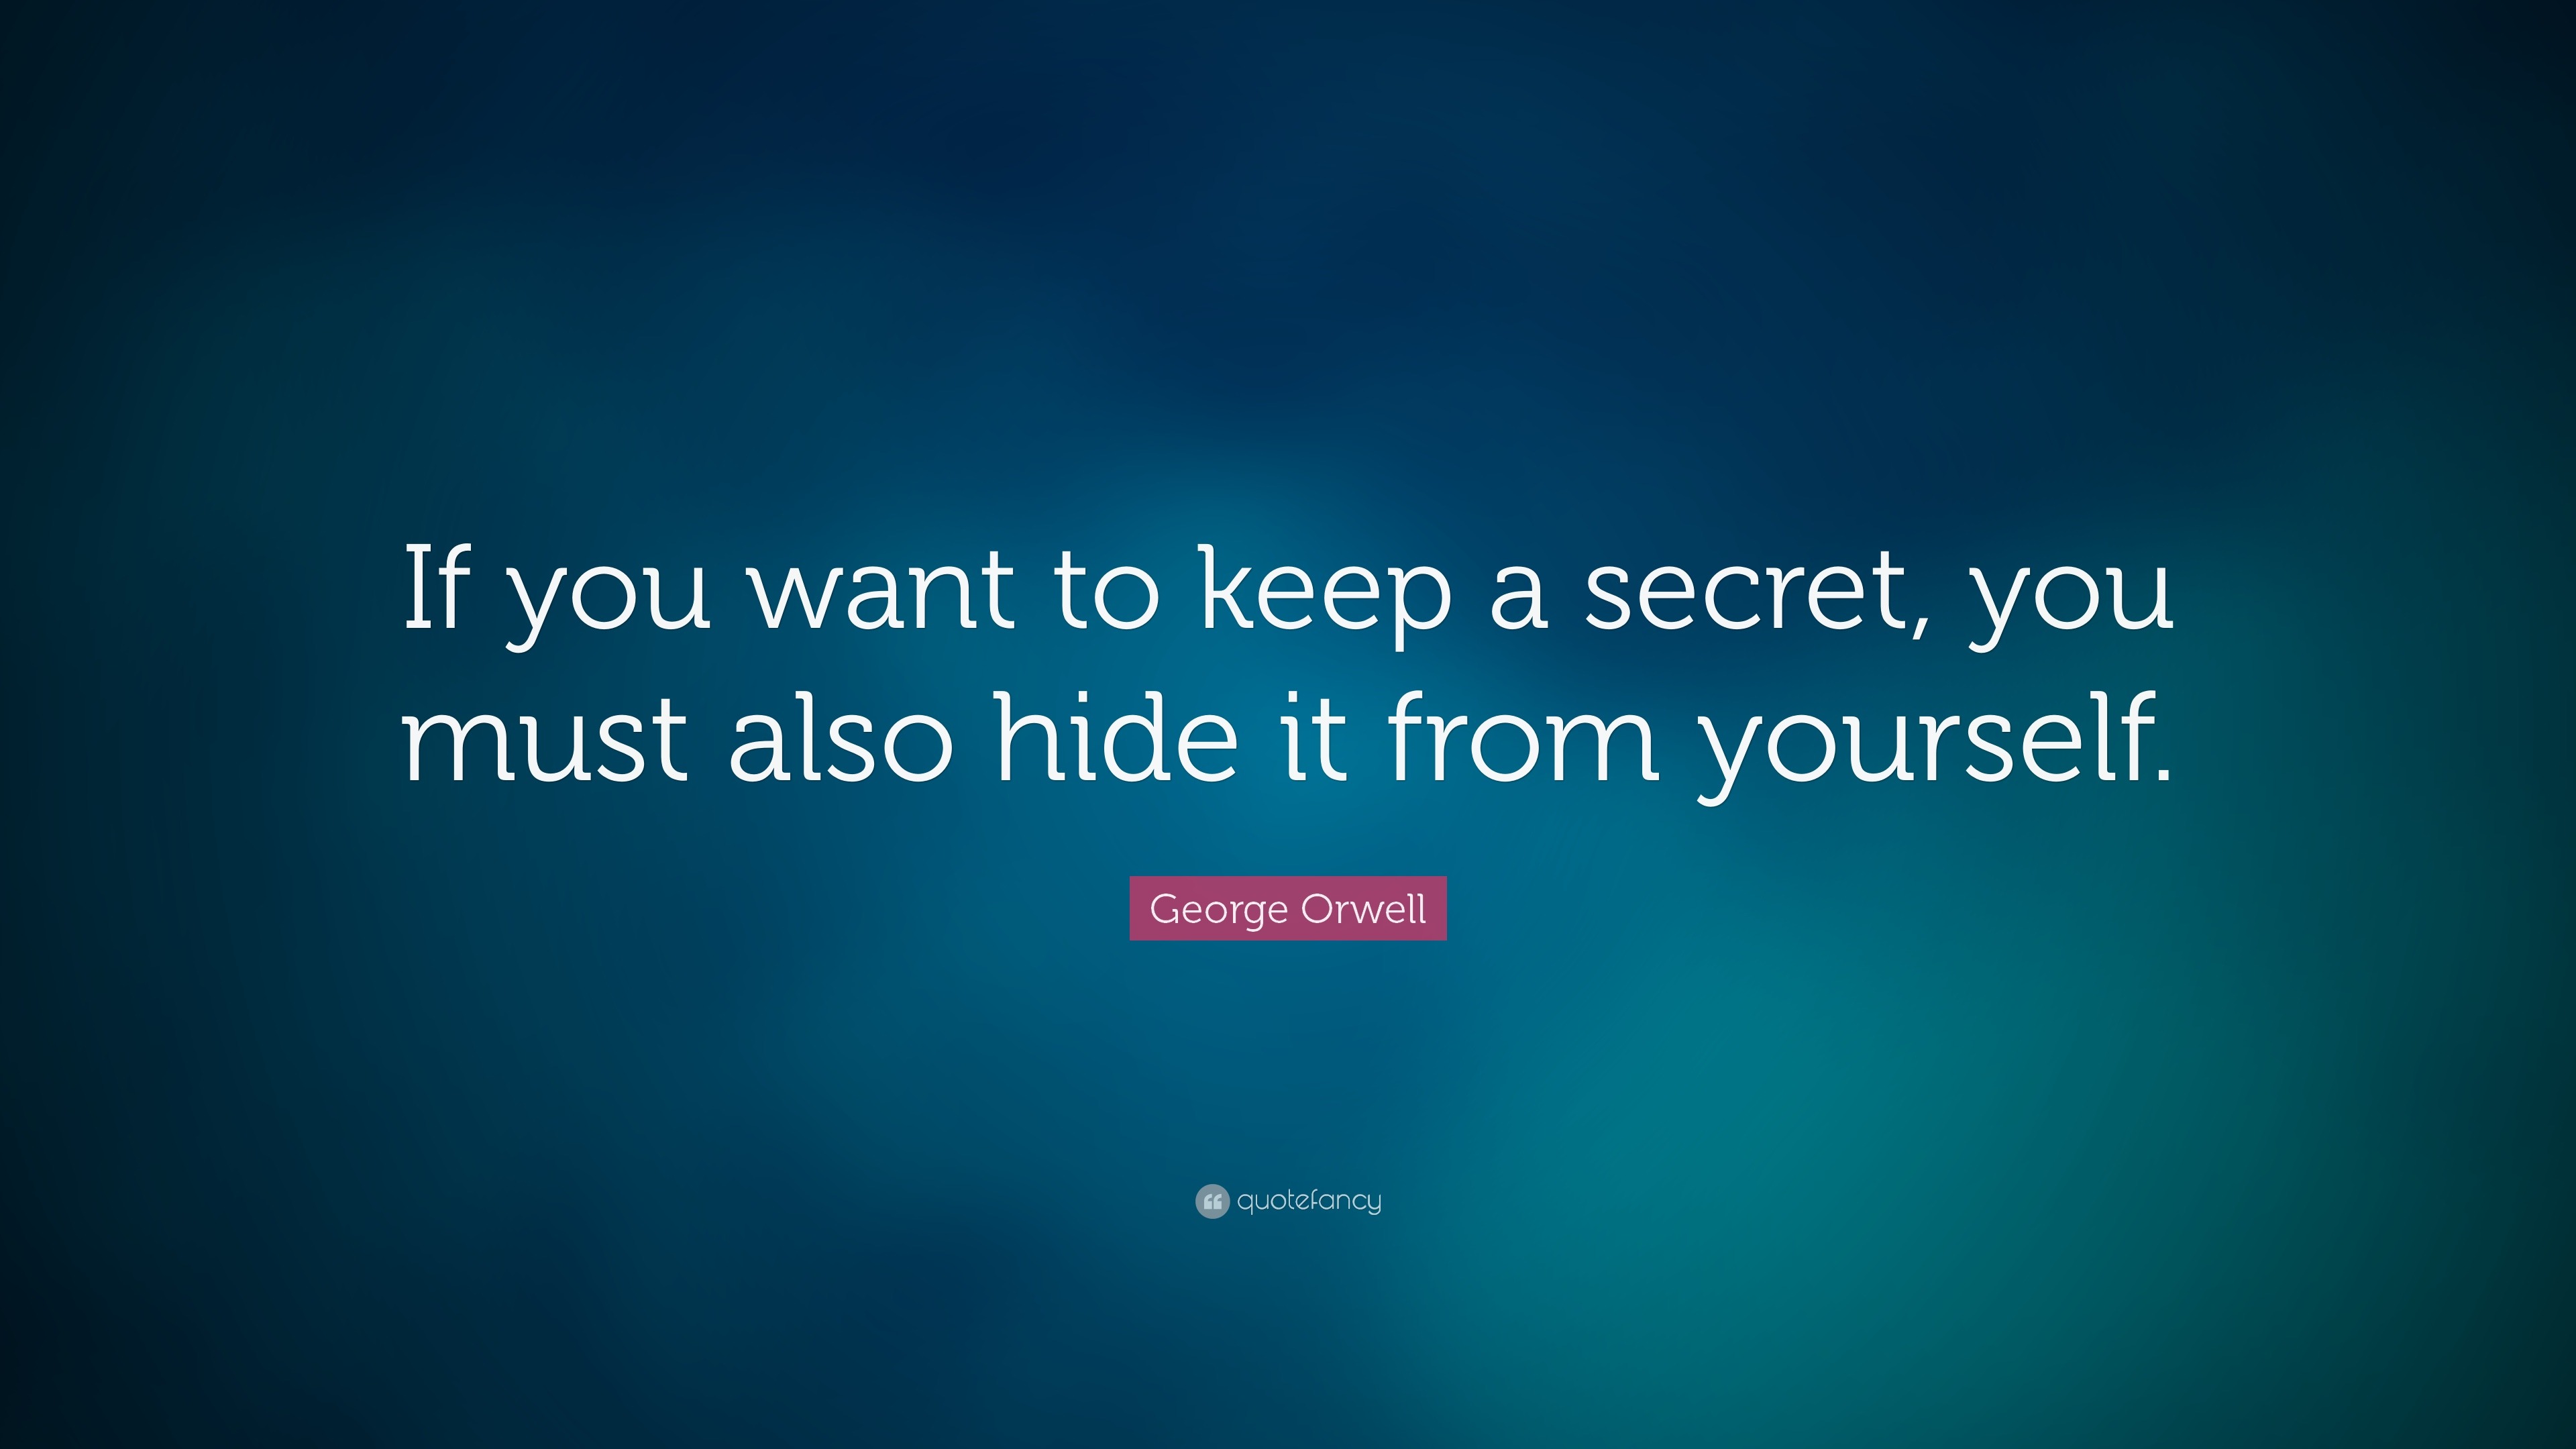 If you want to keep a secret, you must also hide it from yourself